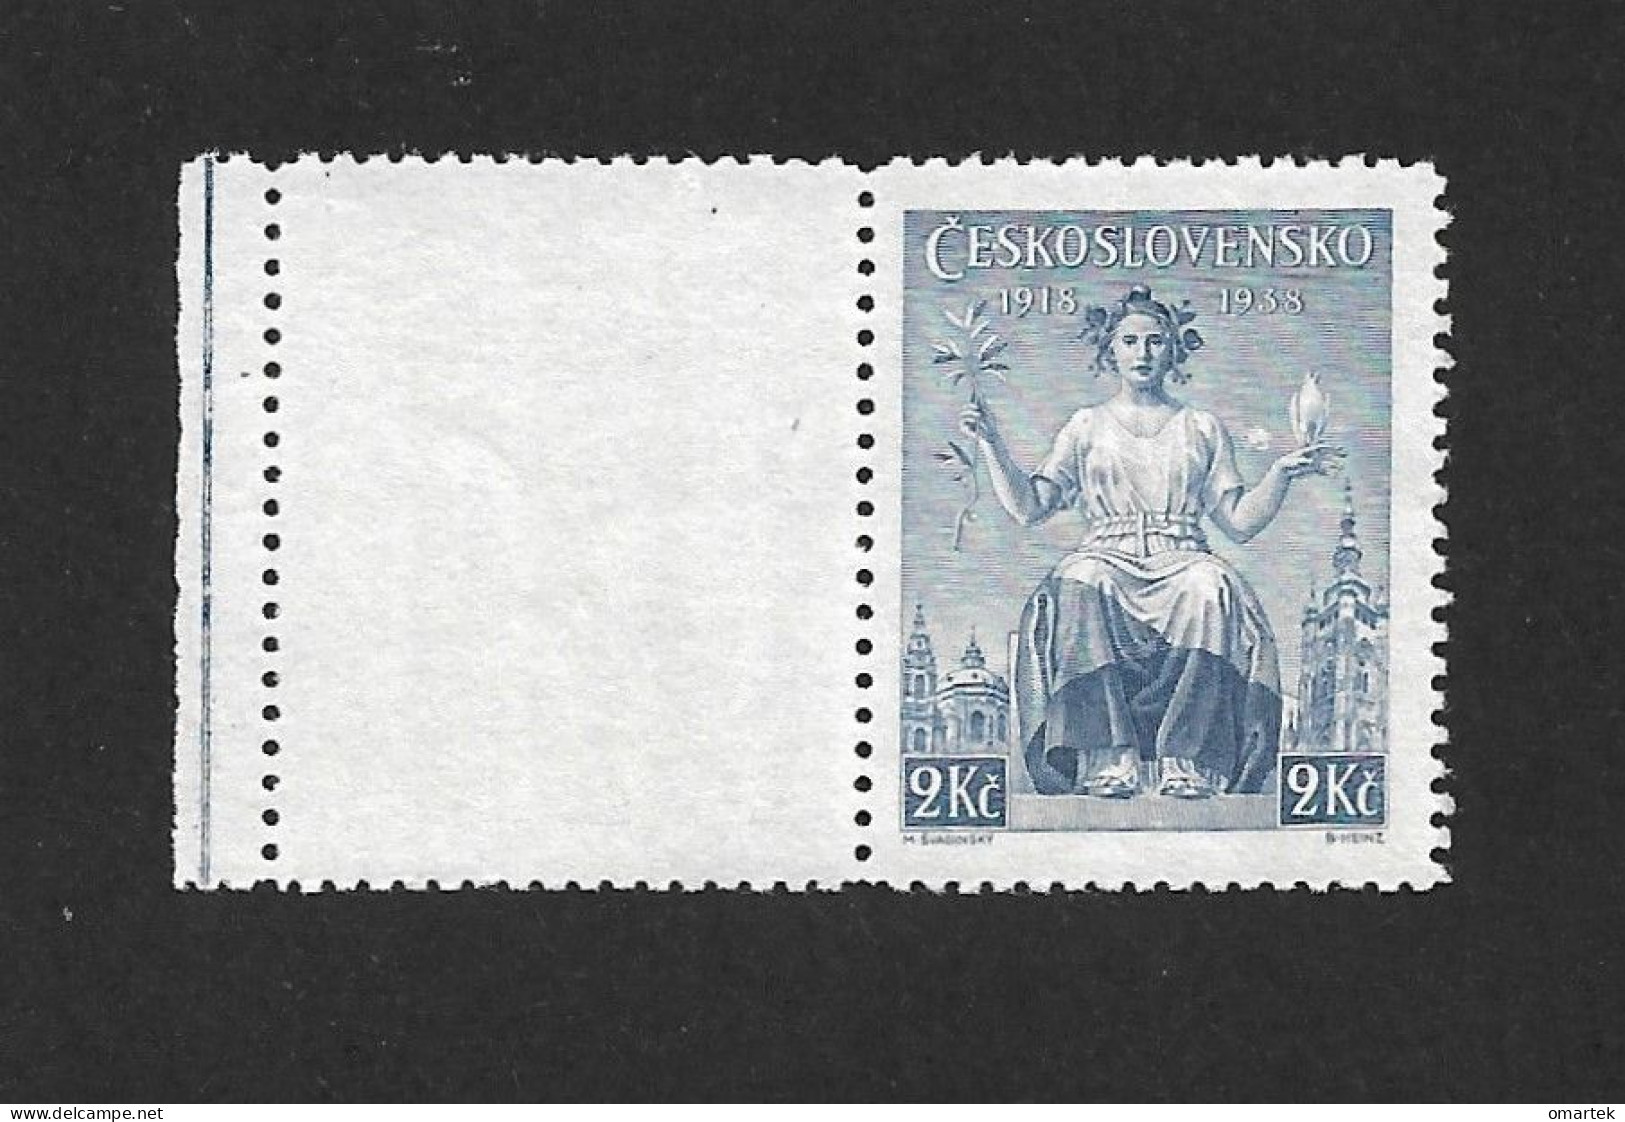 Czechoslovakia 1938 MNH ** Mi 404 Zf L Sc 254 Alegory Of The Republic With Coupon. Tschechoslowakei C1 - Unused Stamps